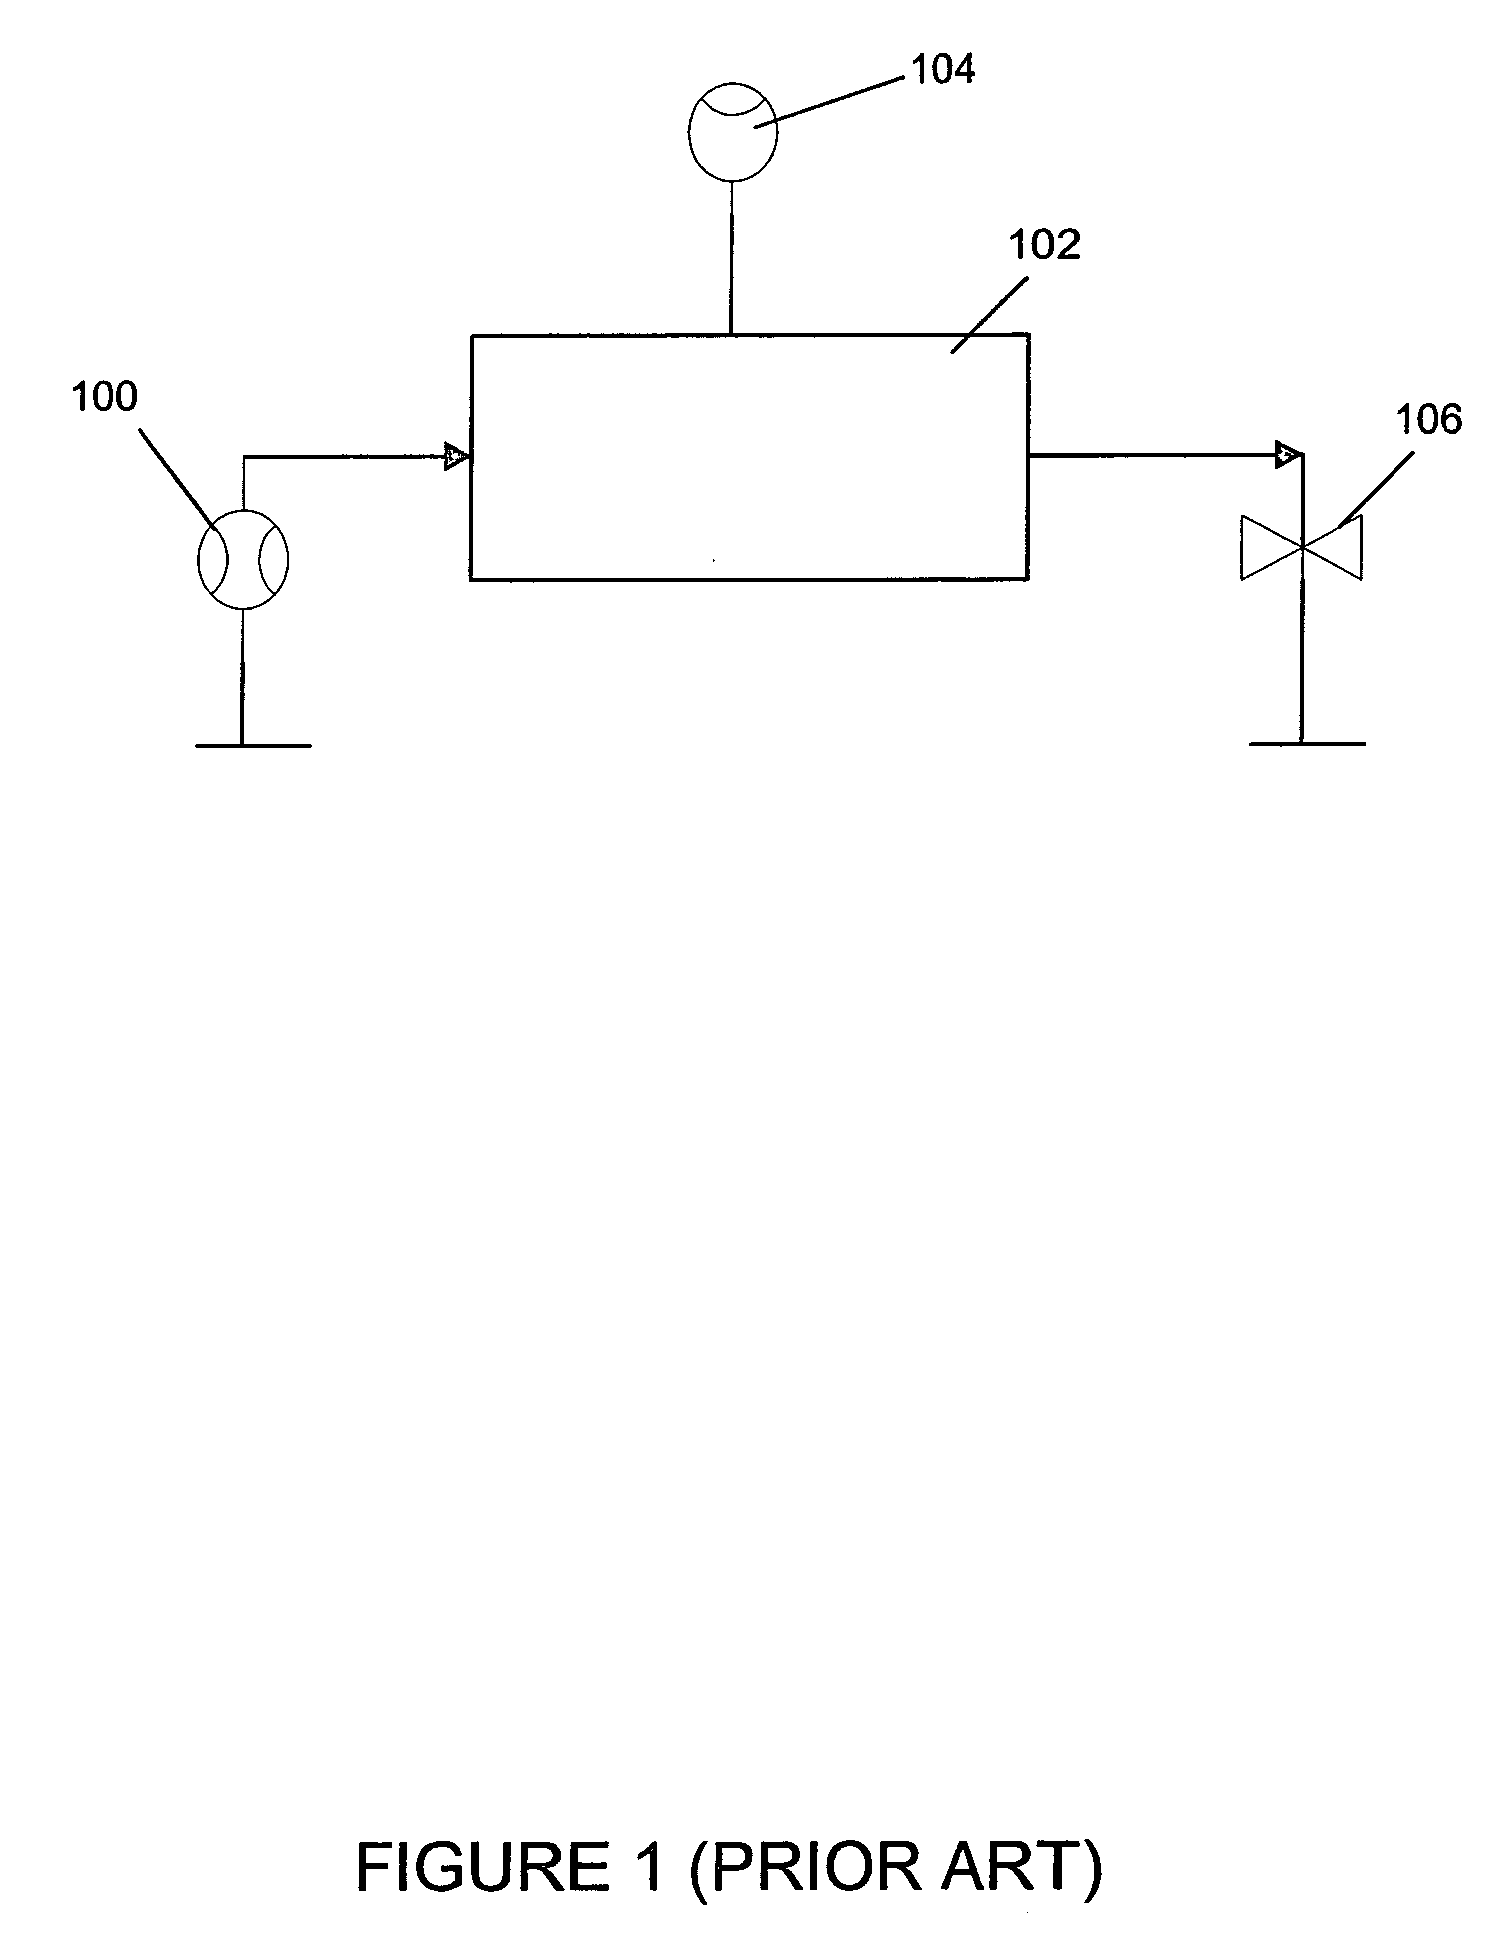 Method and system for assessing and diagnosing control loop performance